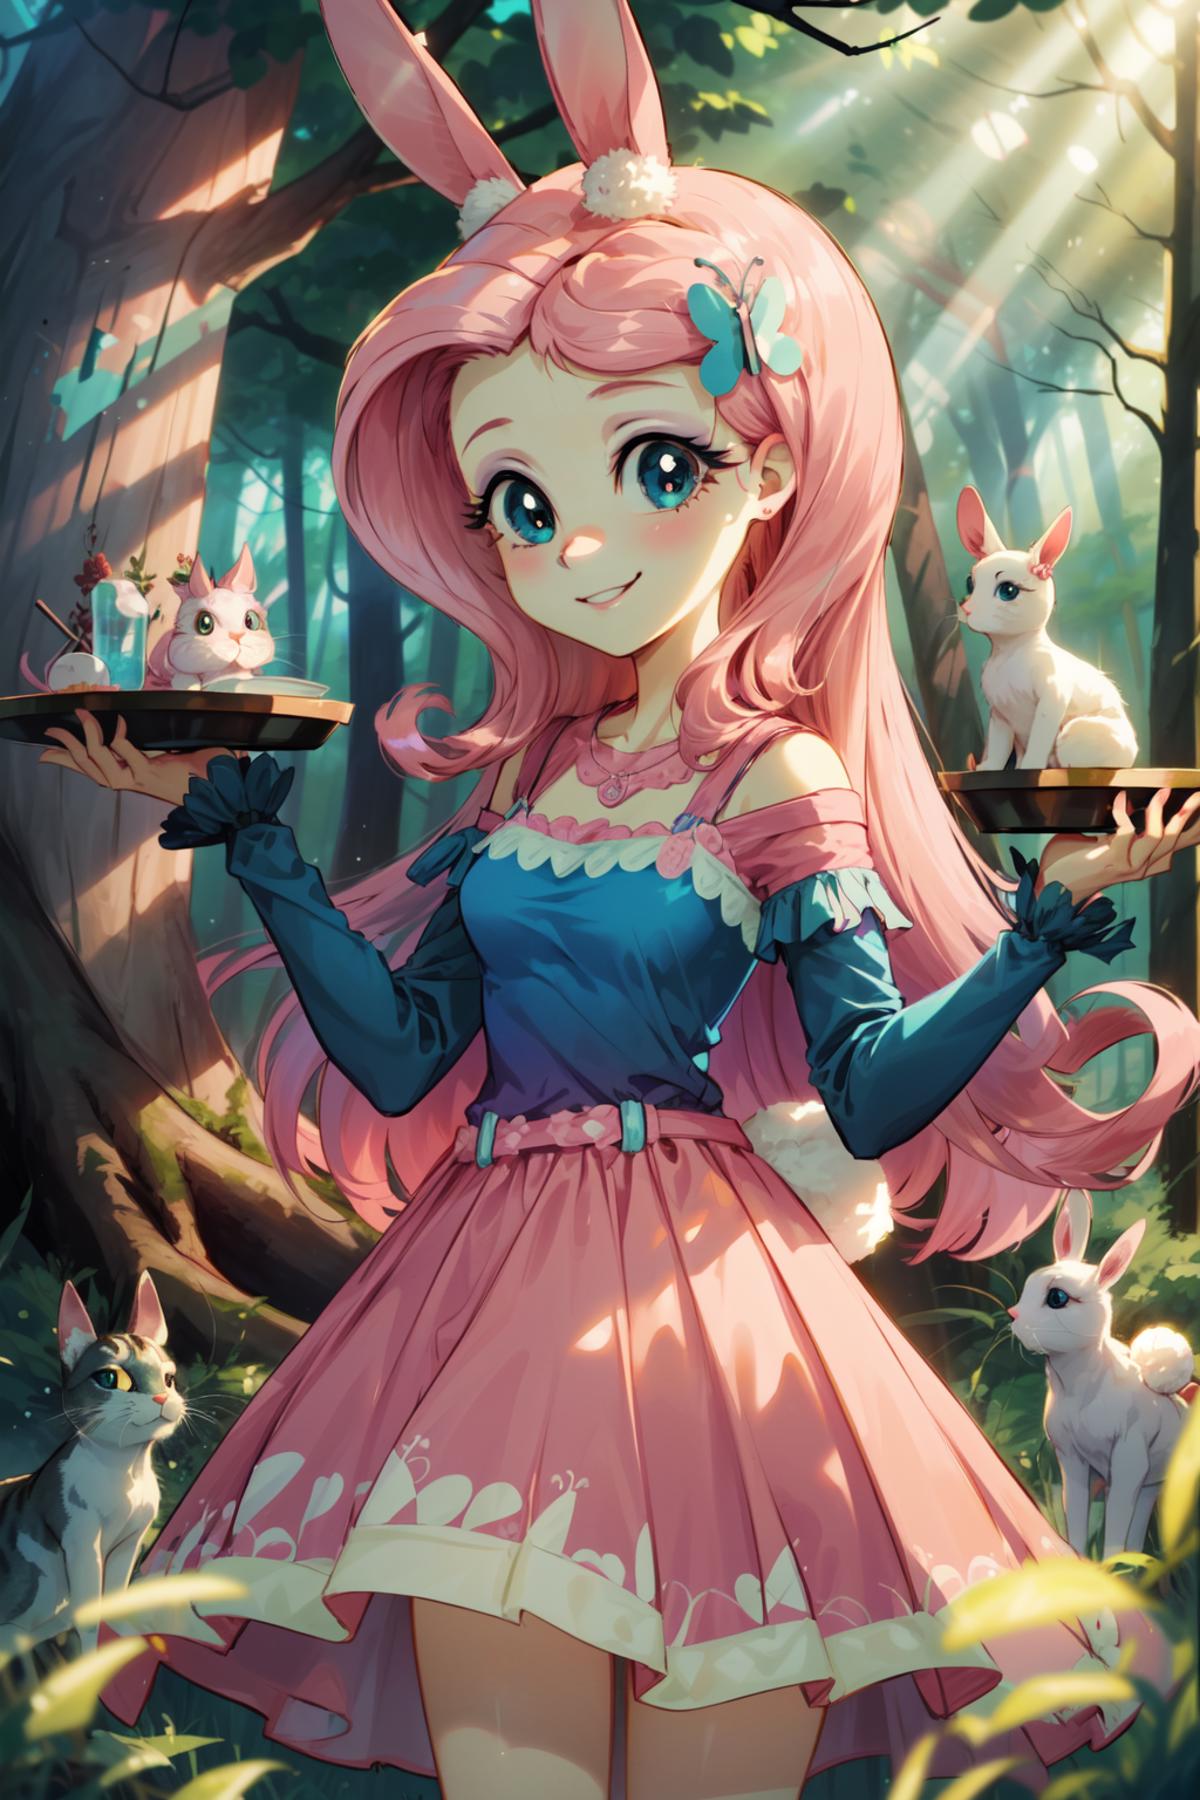 Fluttershy | My Little Pony / Equestria Girls image by UnknownNo3